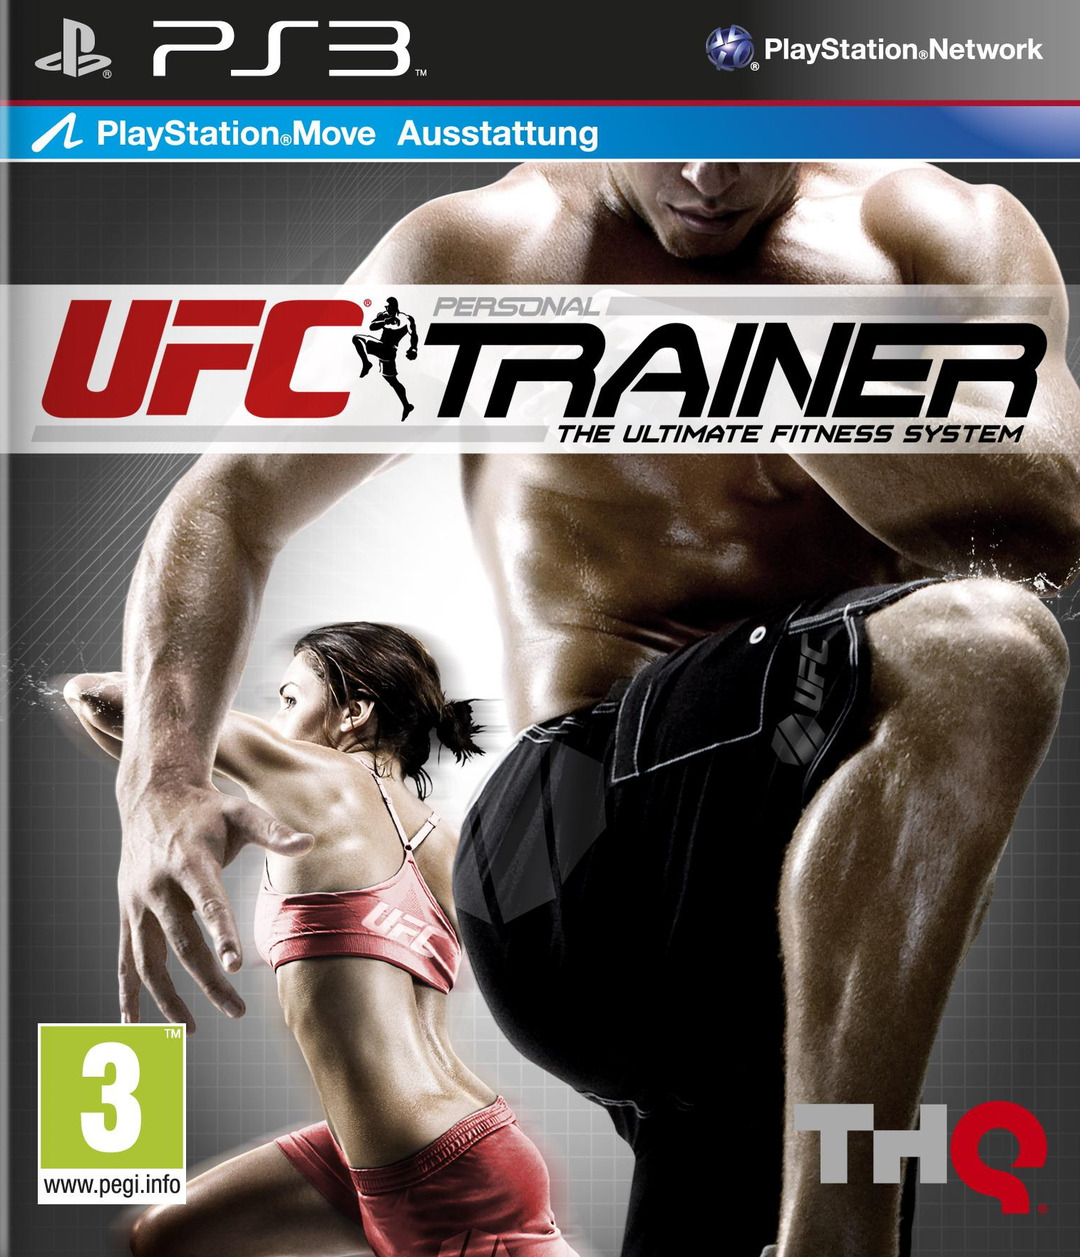 UFC Personal Trainer :The Ultimate Fitness System